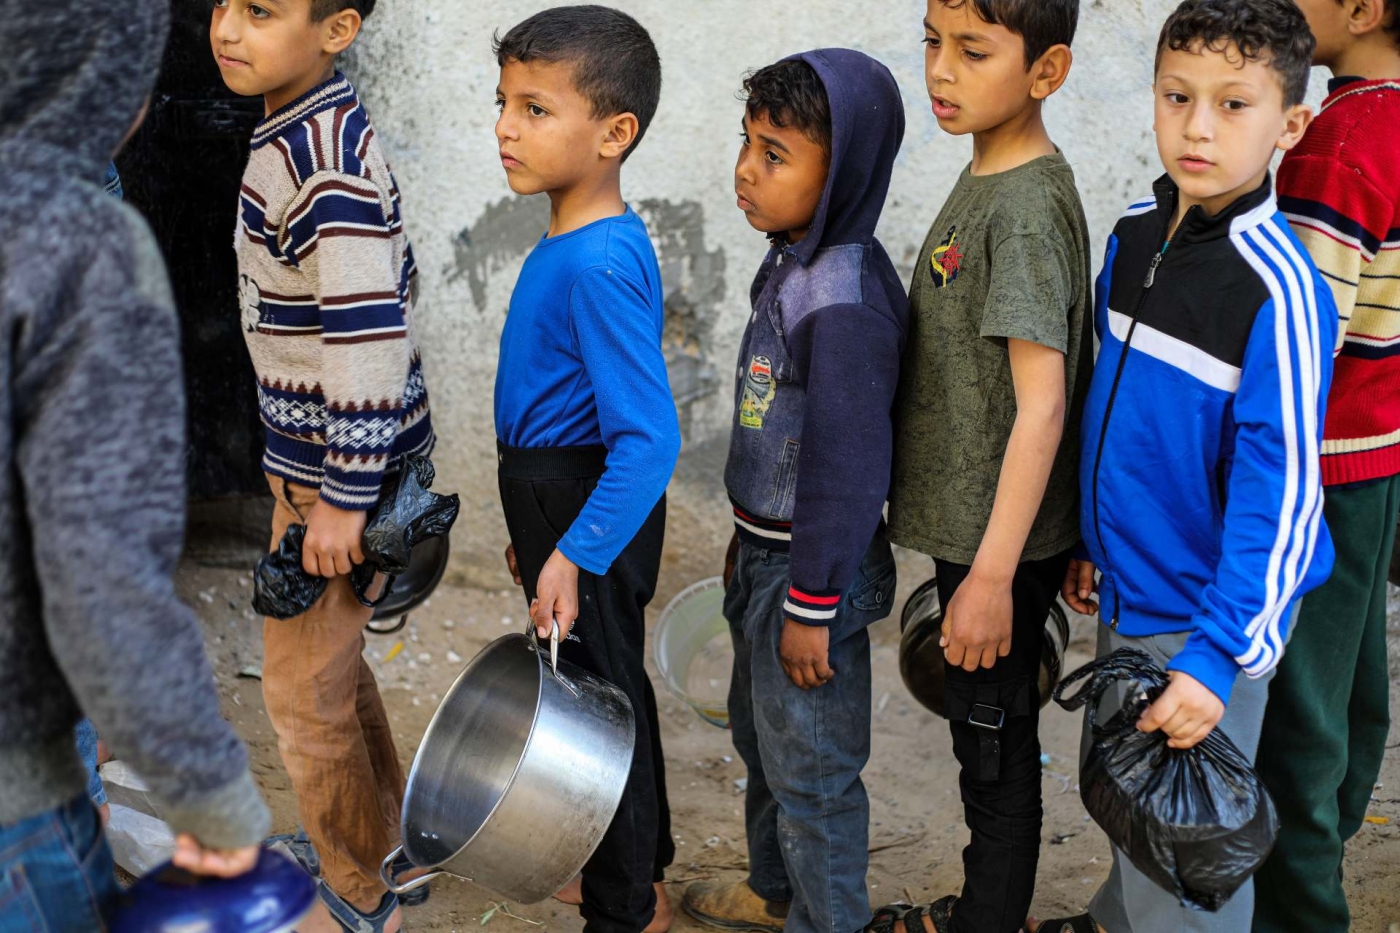 Children in Gaza's Al-Nuseirat refugee camp queue for soup provided by a charity during Ramadan, in April 2022 (Reuters)